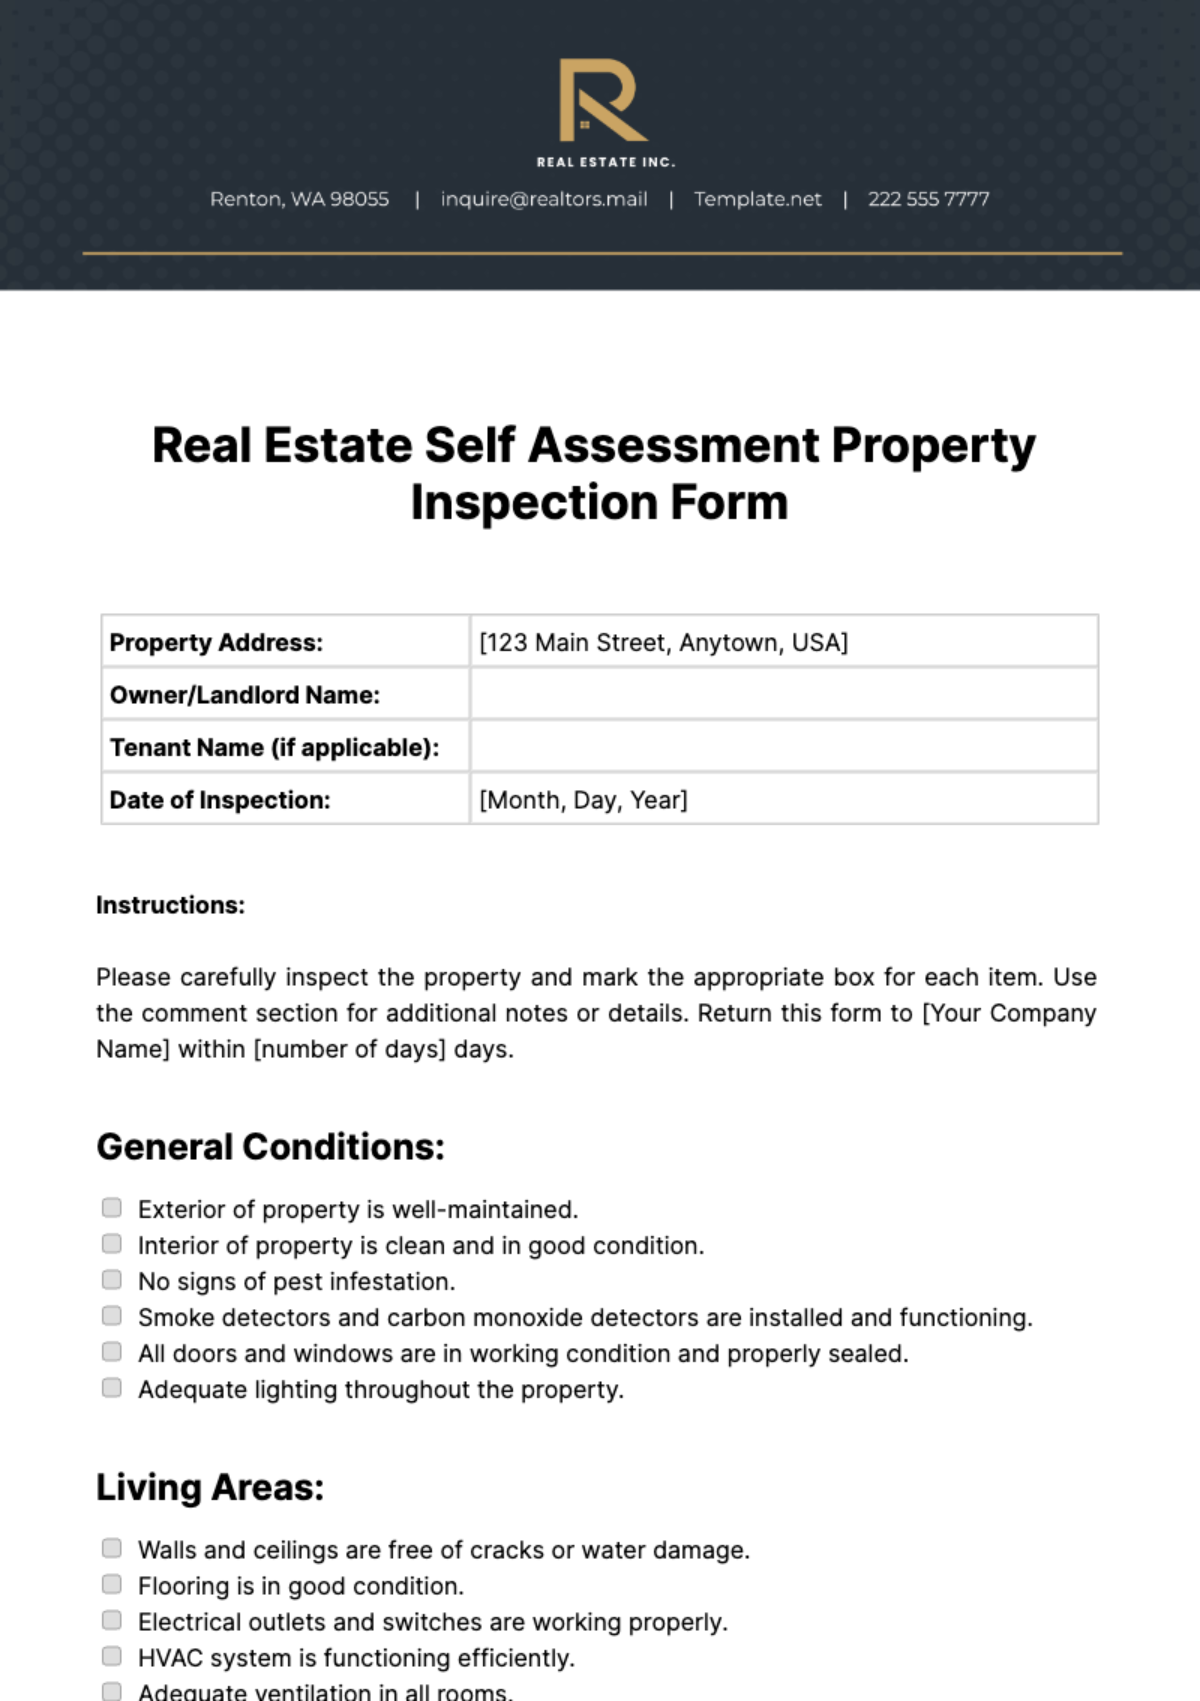 Free Real Estate Self Assessment Property Inspection Form Template